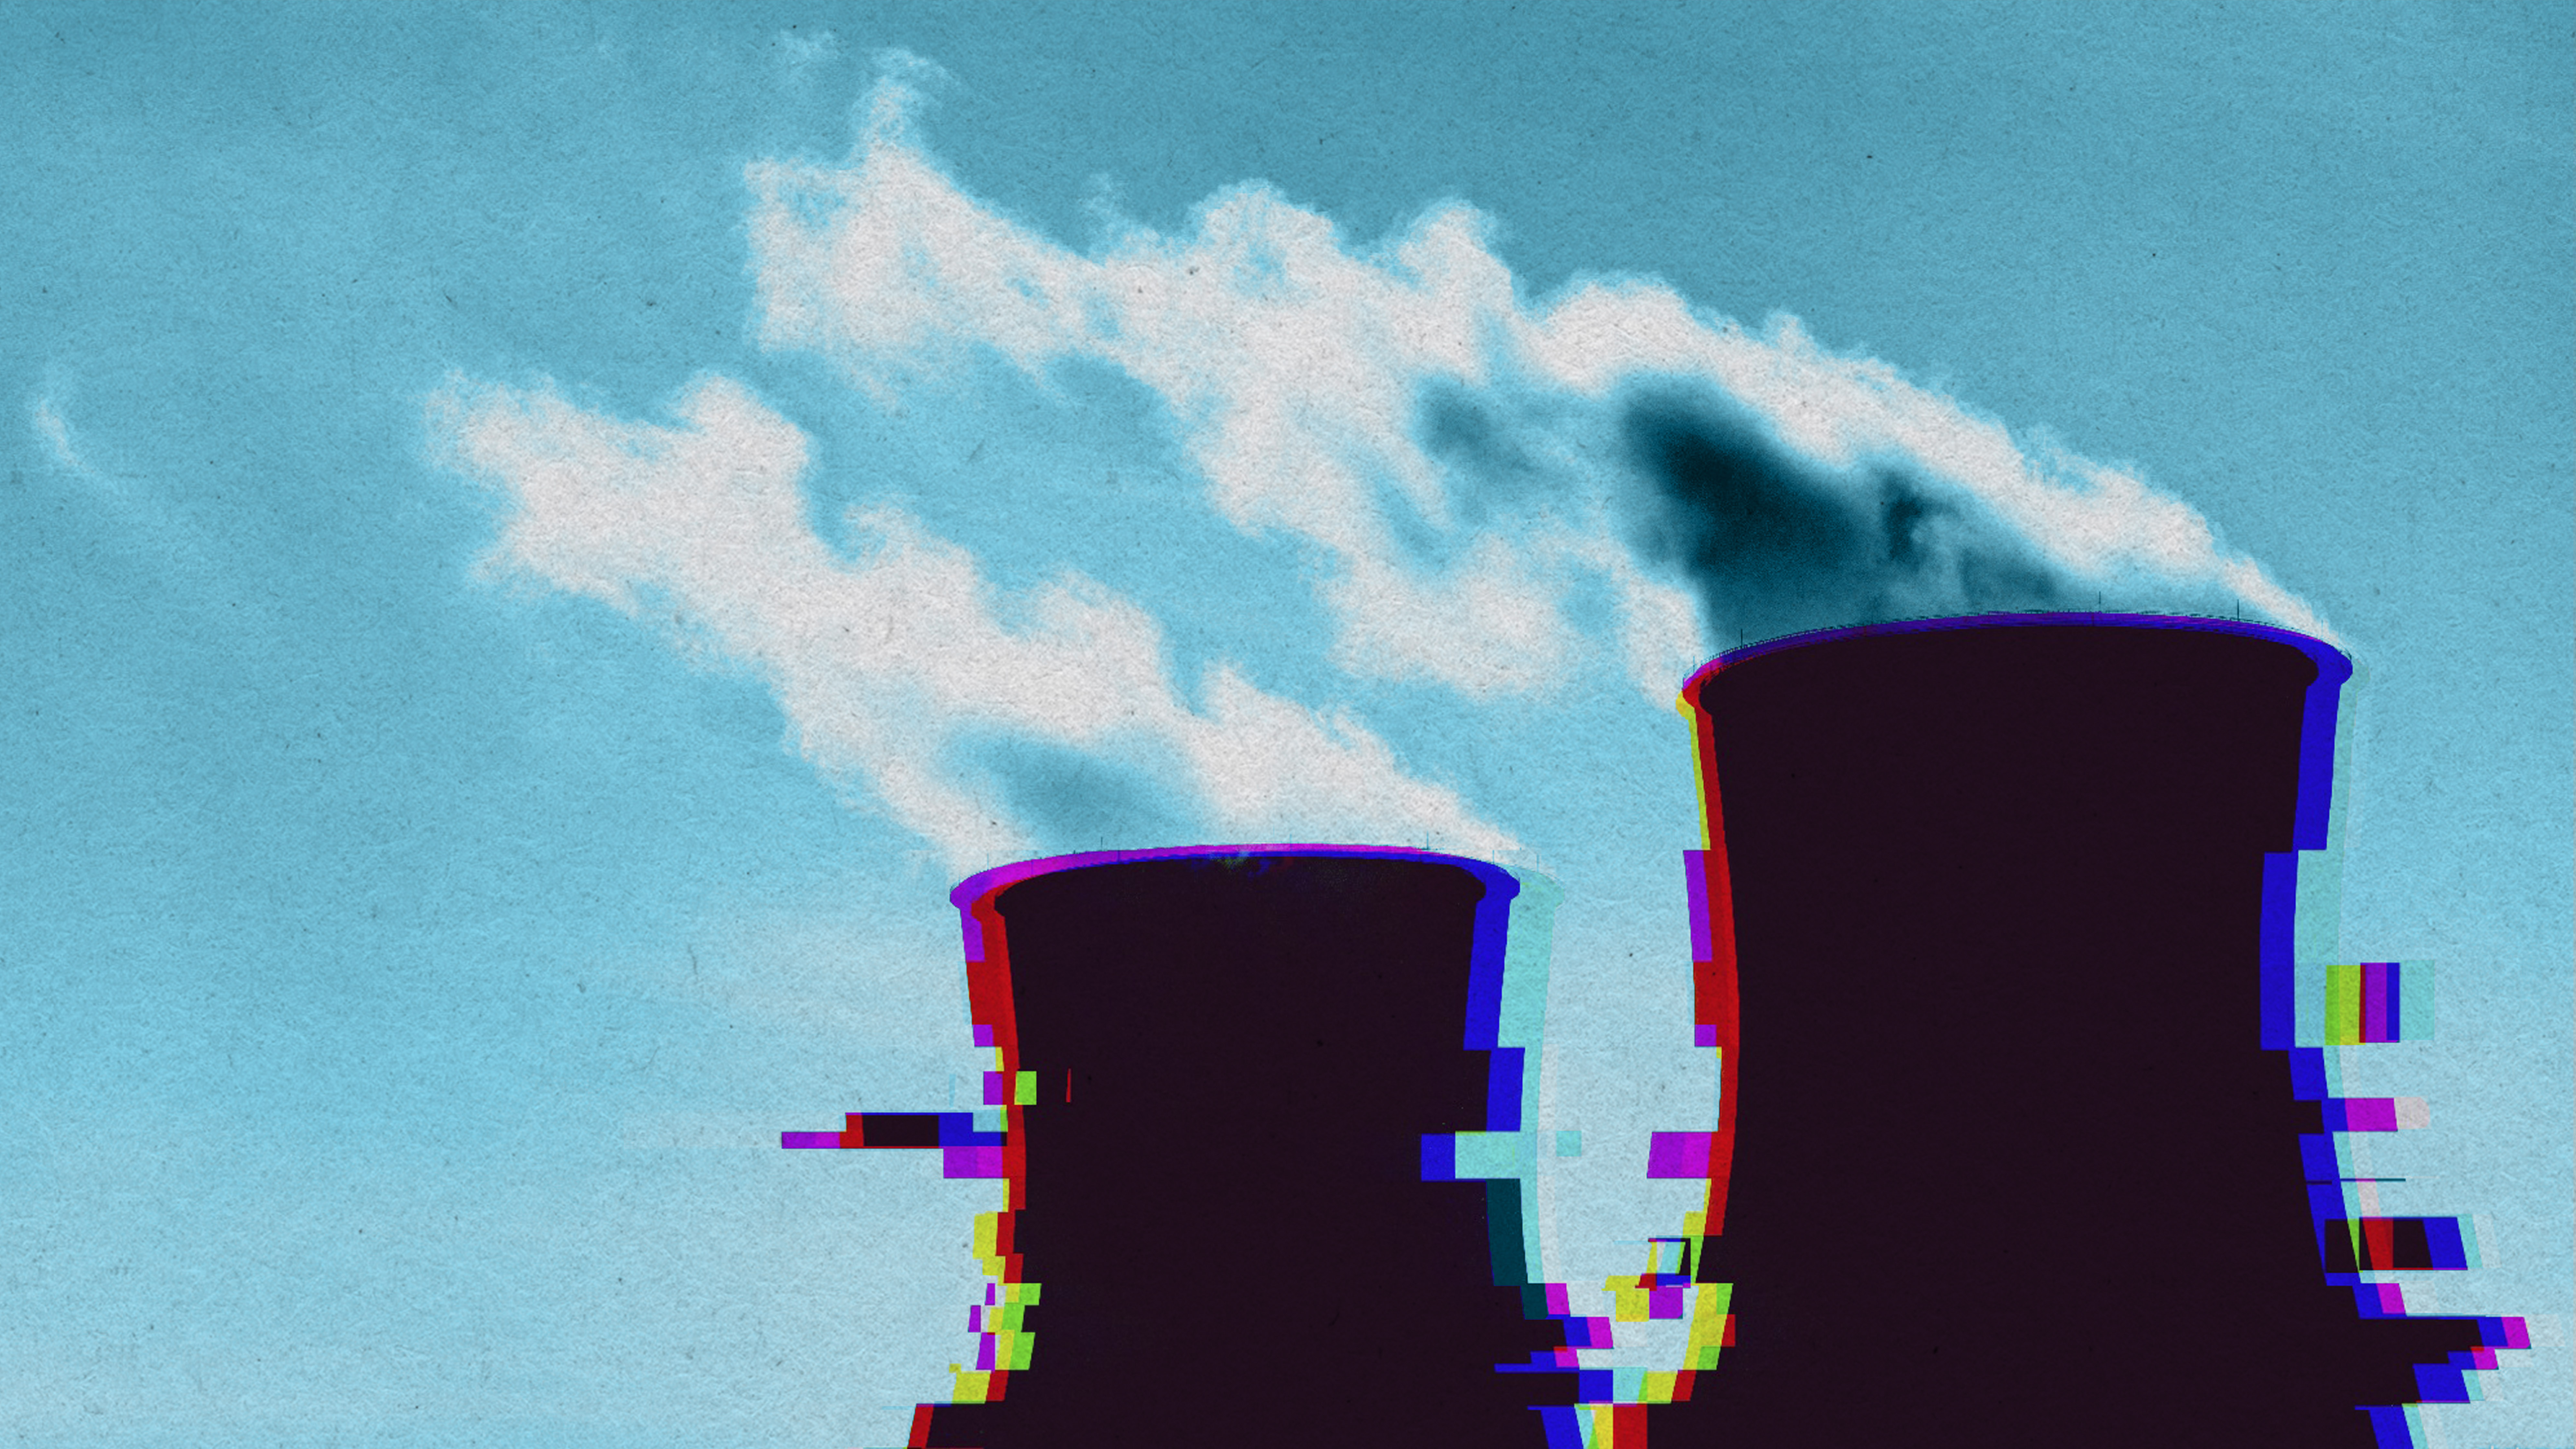 Photo illustration concept of virtual power plant, showing two power plant stacks with a glitch effect.